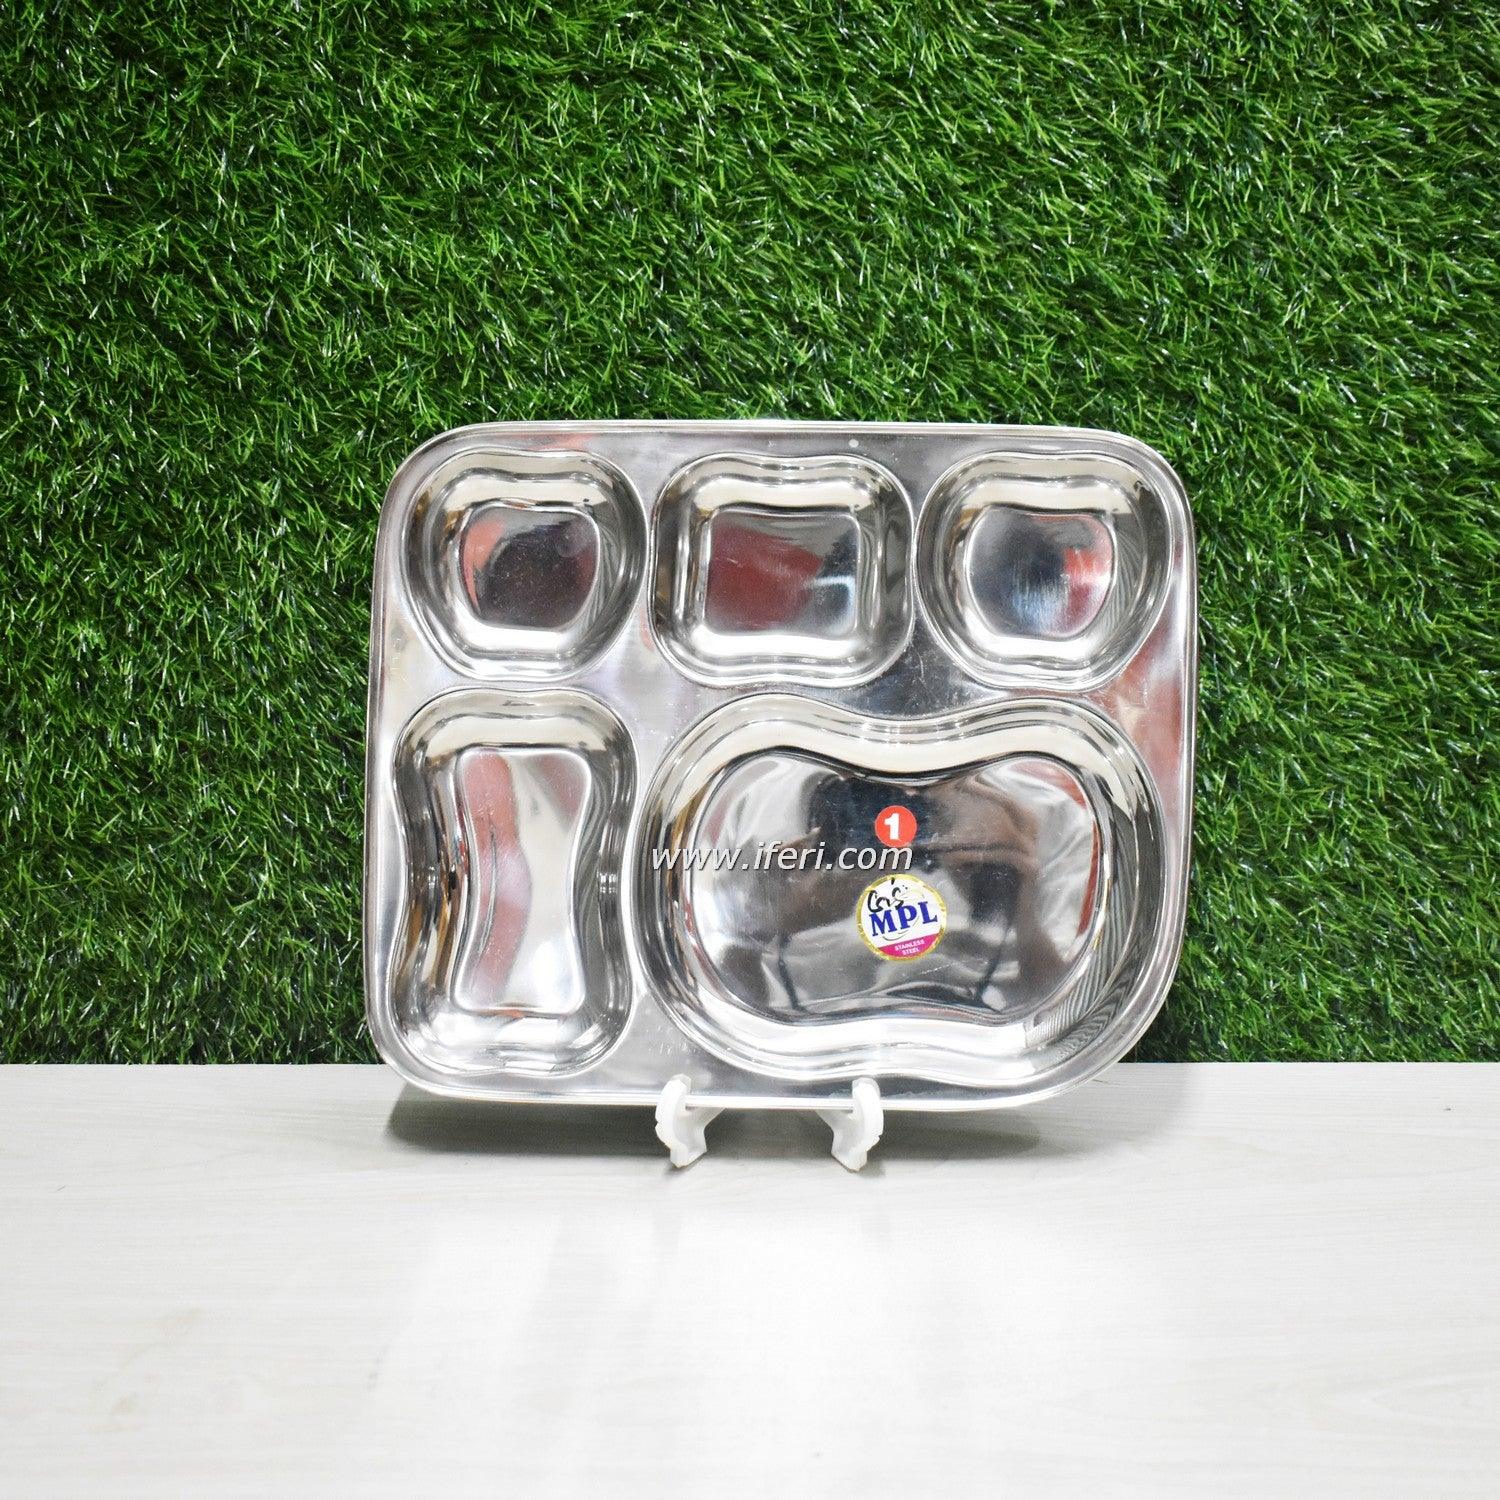 5 Compartment Stainless Steel Thali SN5876 Price in Bangladesh - iferi.com